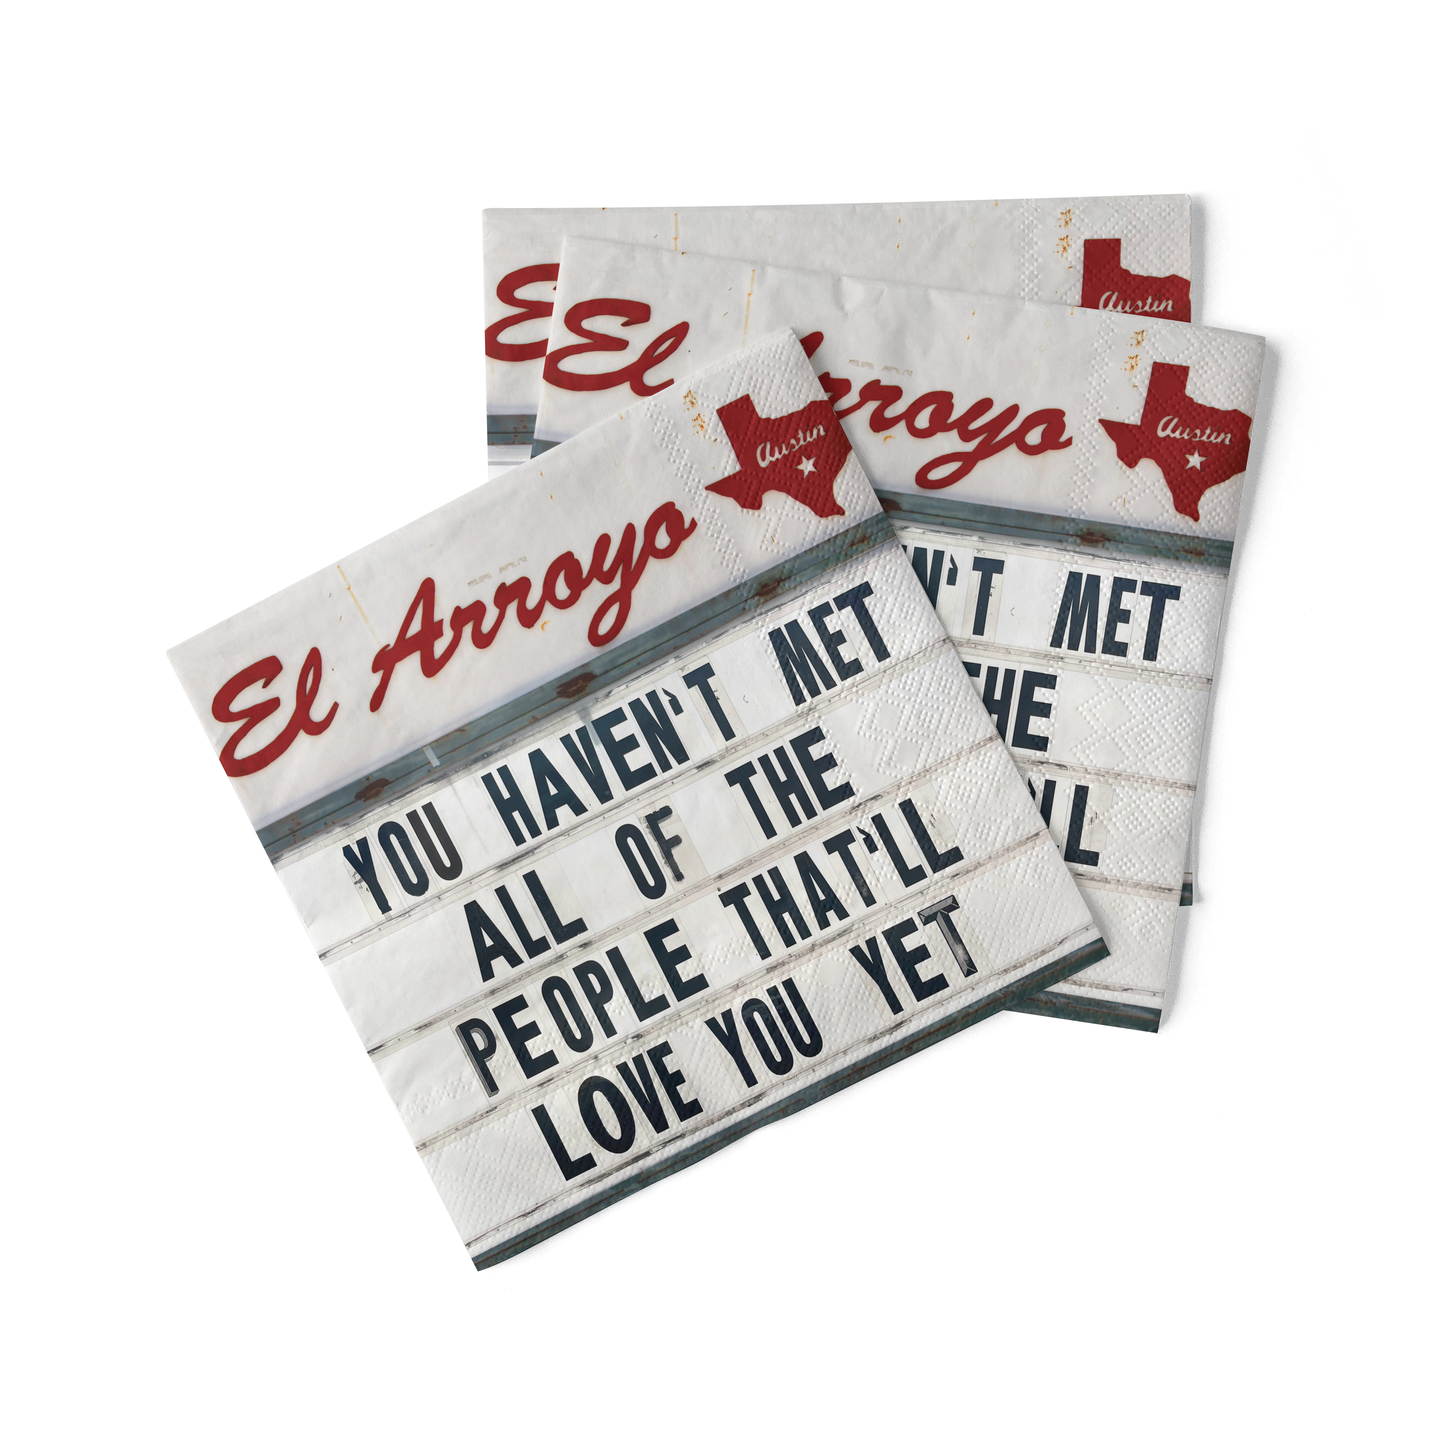 El Arroyo - Cocktail Napkins (Pack of 20) - Love You Yet